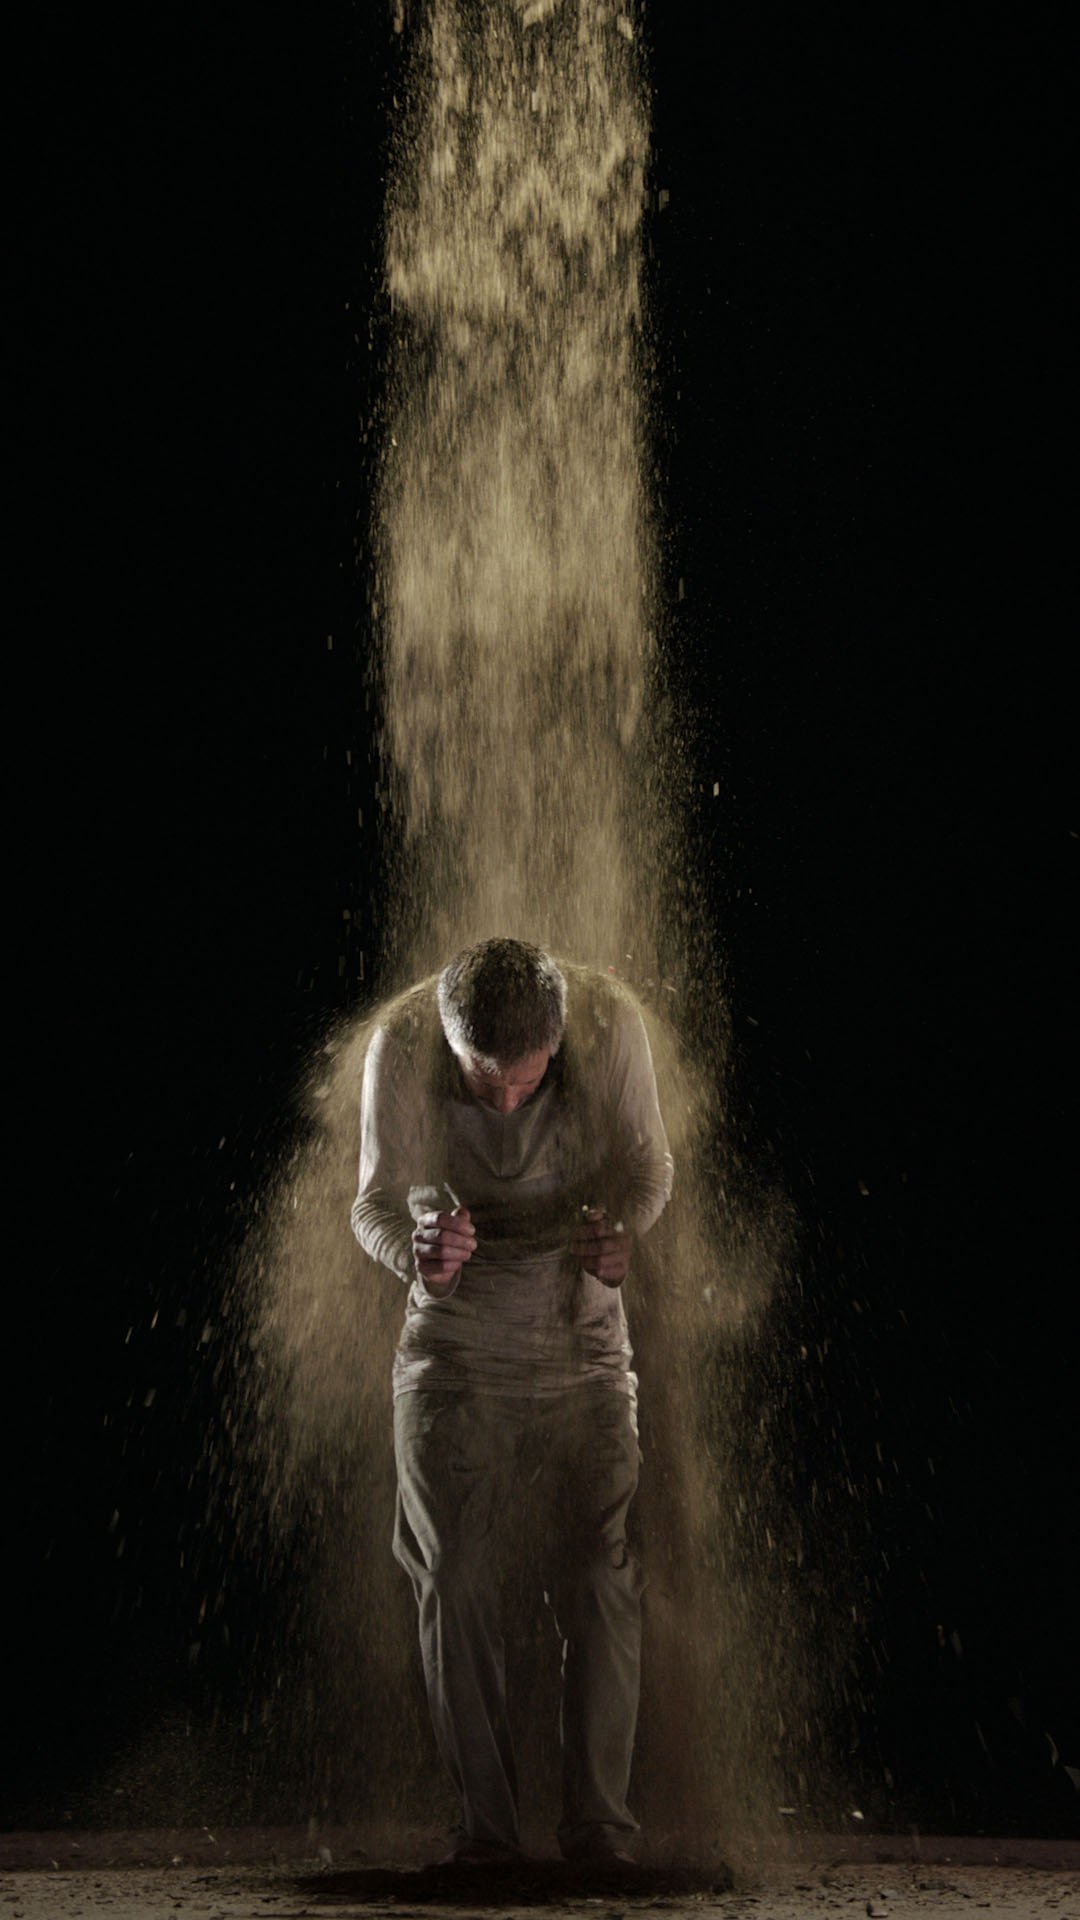 Bill Viola, Earth Martyr, 2014, Color high definition video on flat panel display mounted vertically on wall. Executive producer Kira Perov, Performer Norman Scott